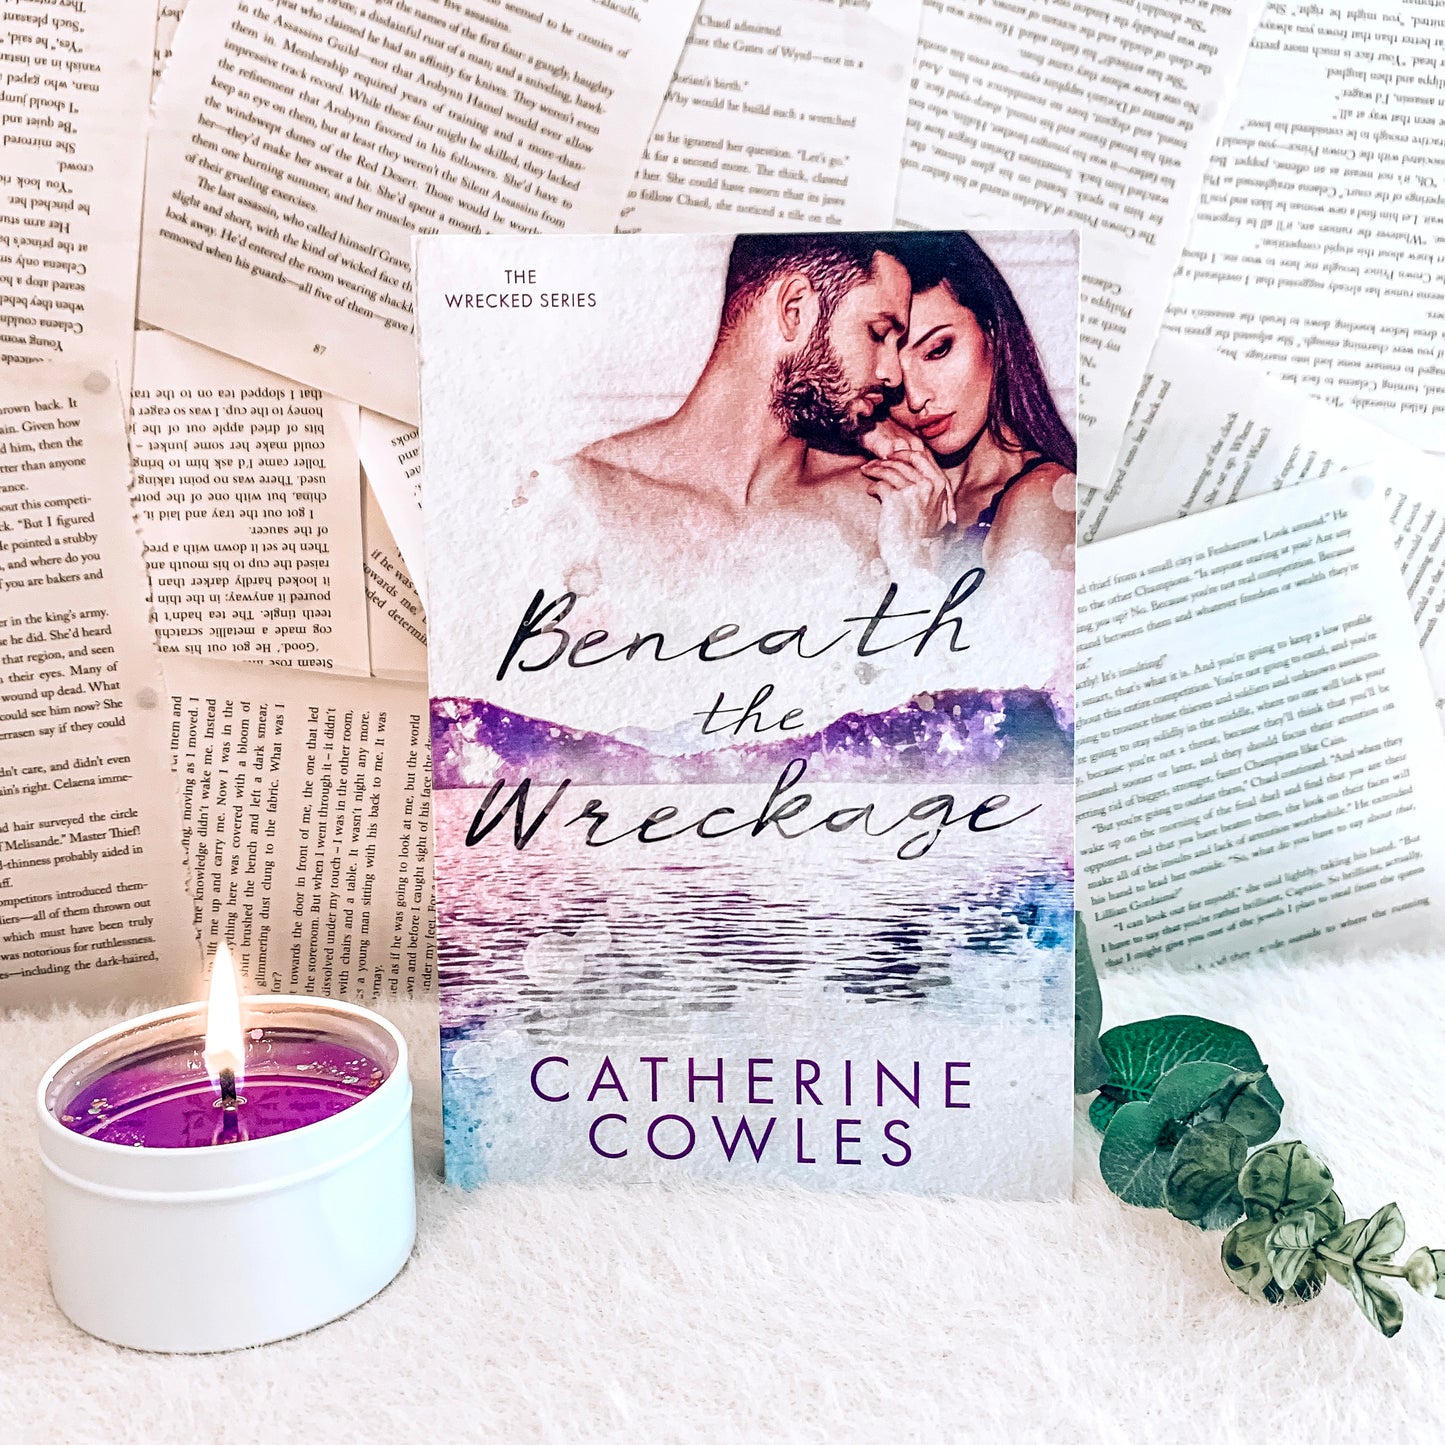 Wrecked series by Catherine Cowles